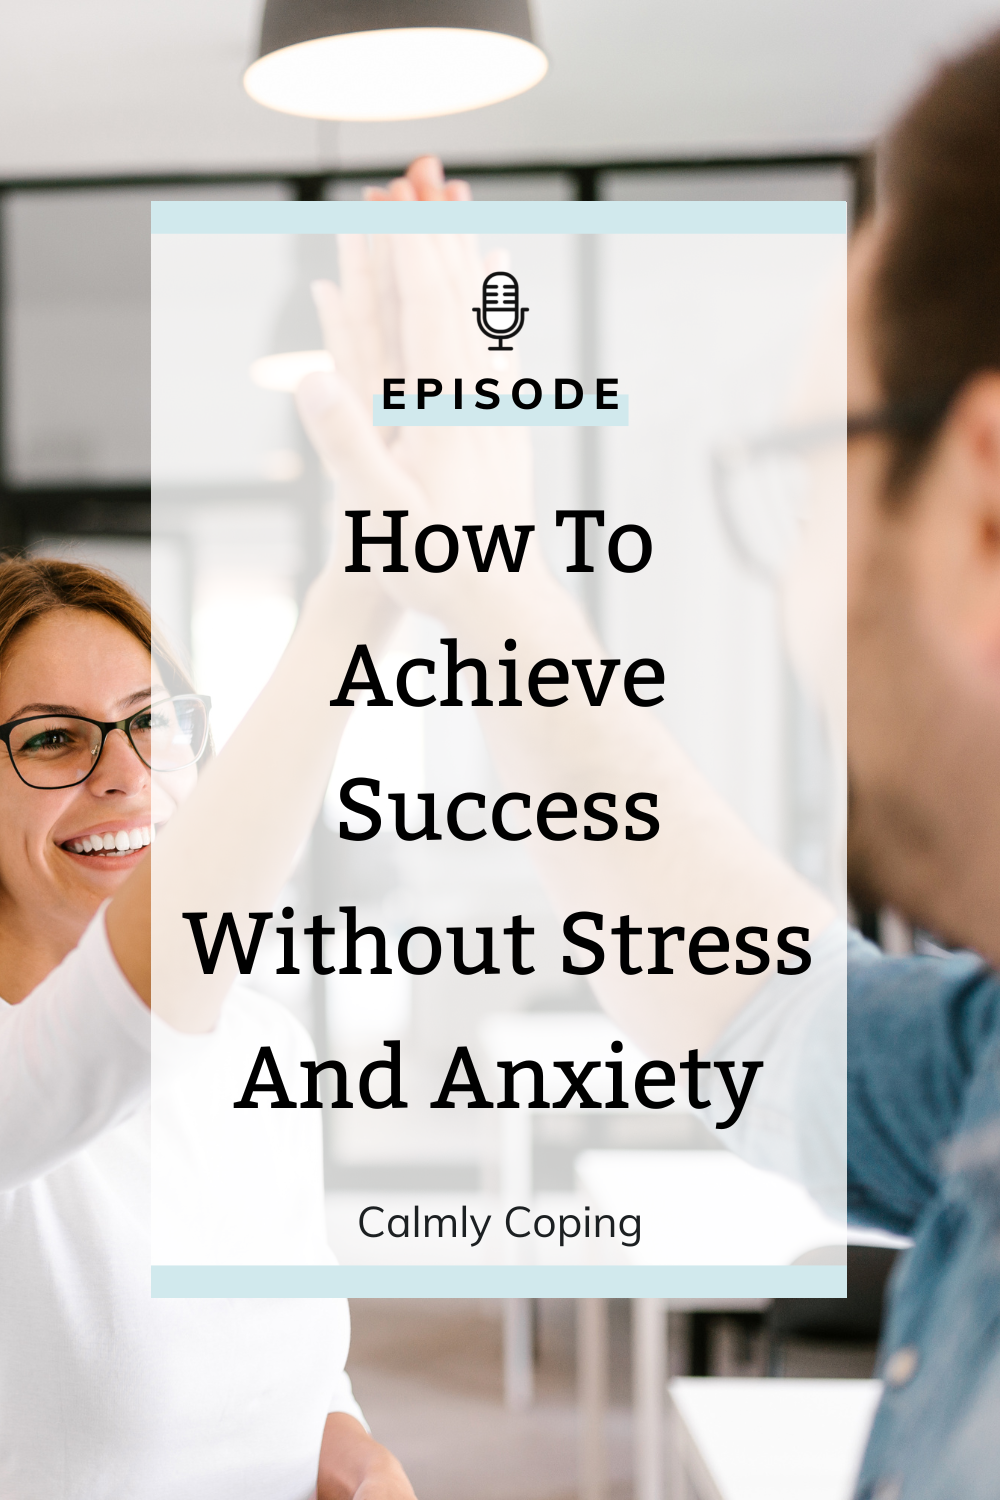 How To Achieve Success Without Stress And Anxiety